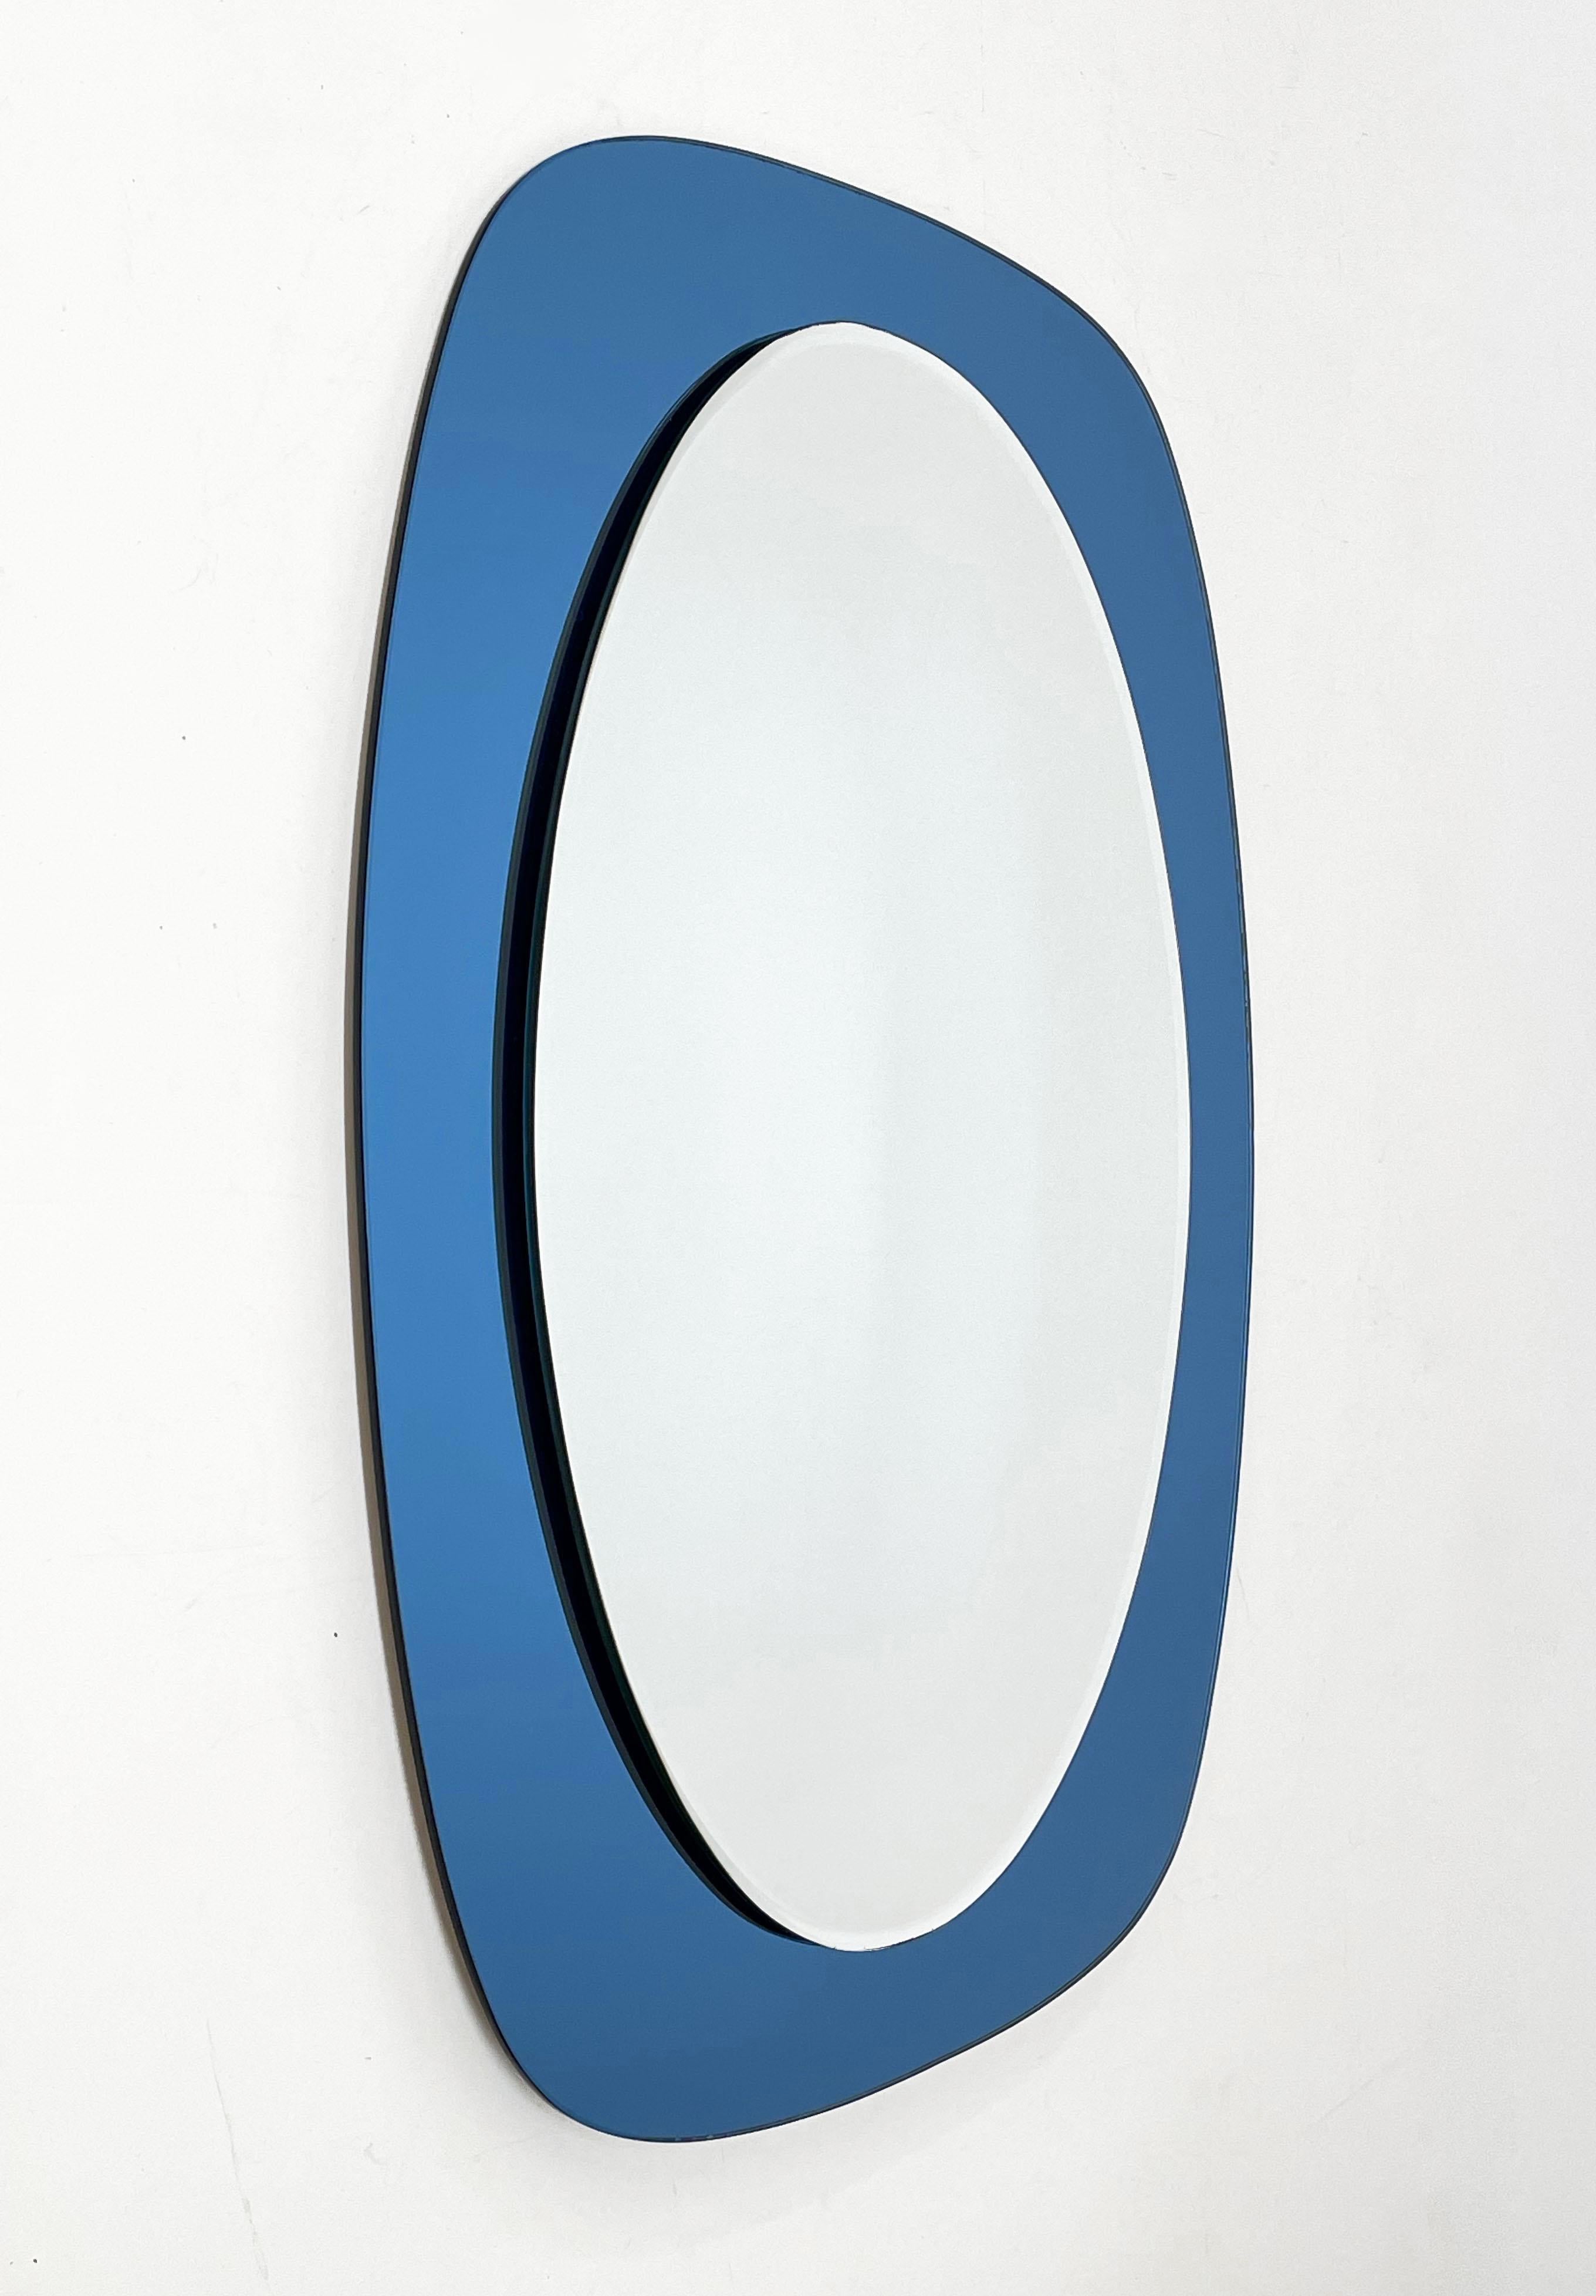 Cristal Art Midcentury Oval Italian Wall Mirror with Blue Glass Frame, 1960s 1